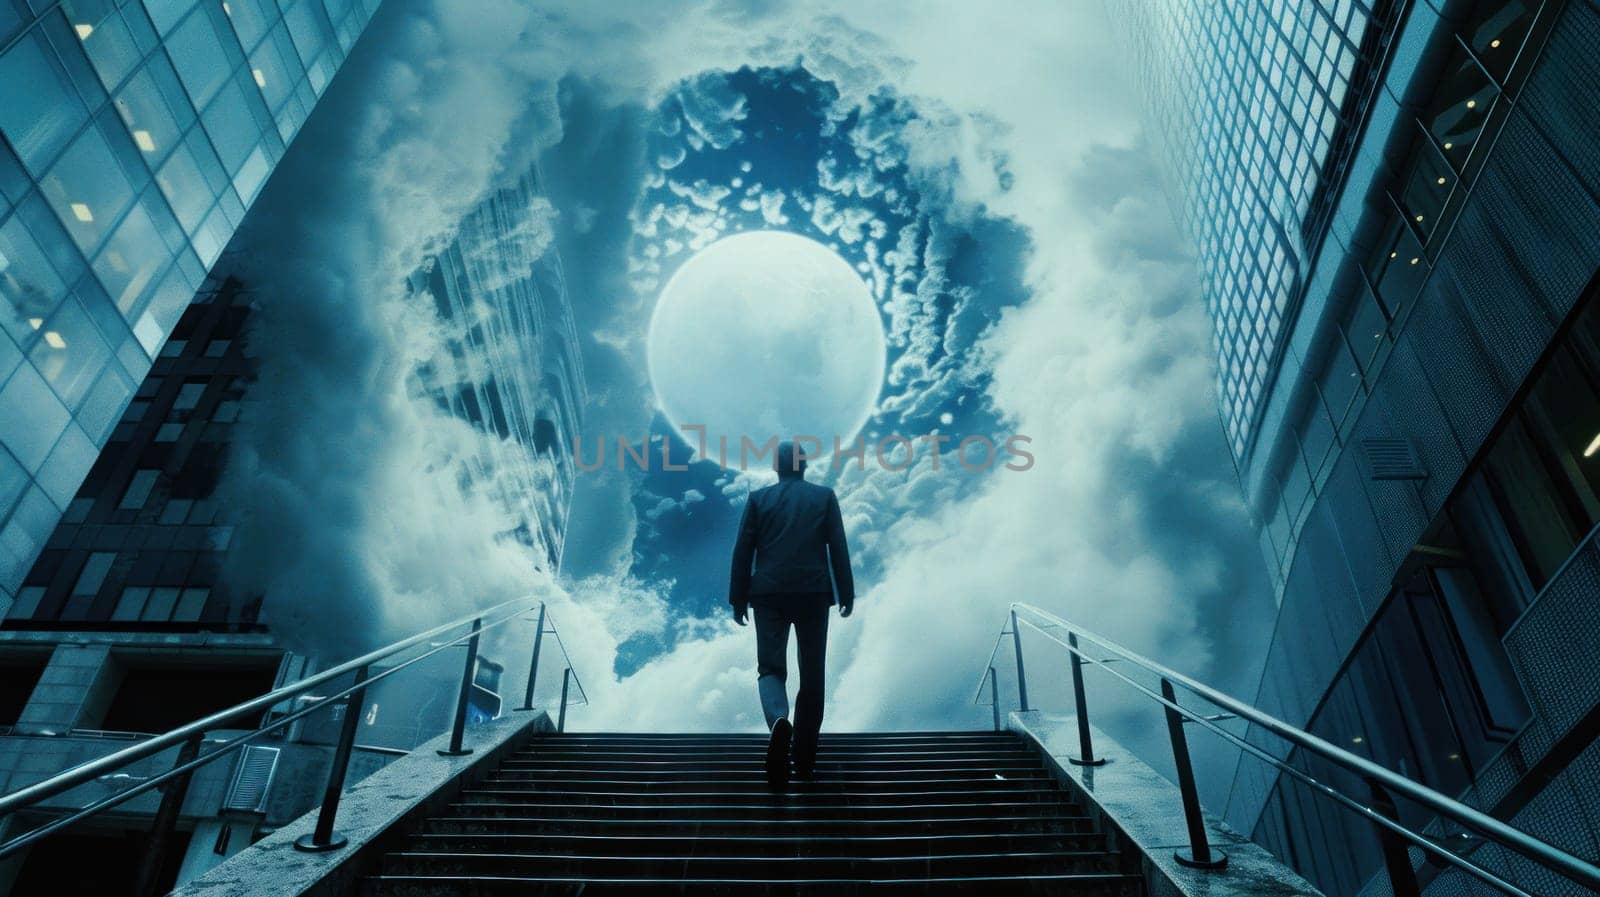 A man is walking on a set of stairs in front of a large moon.